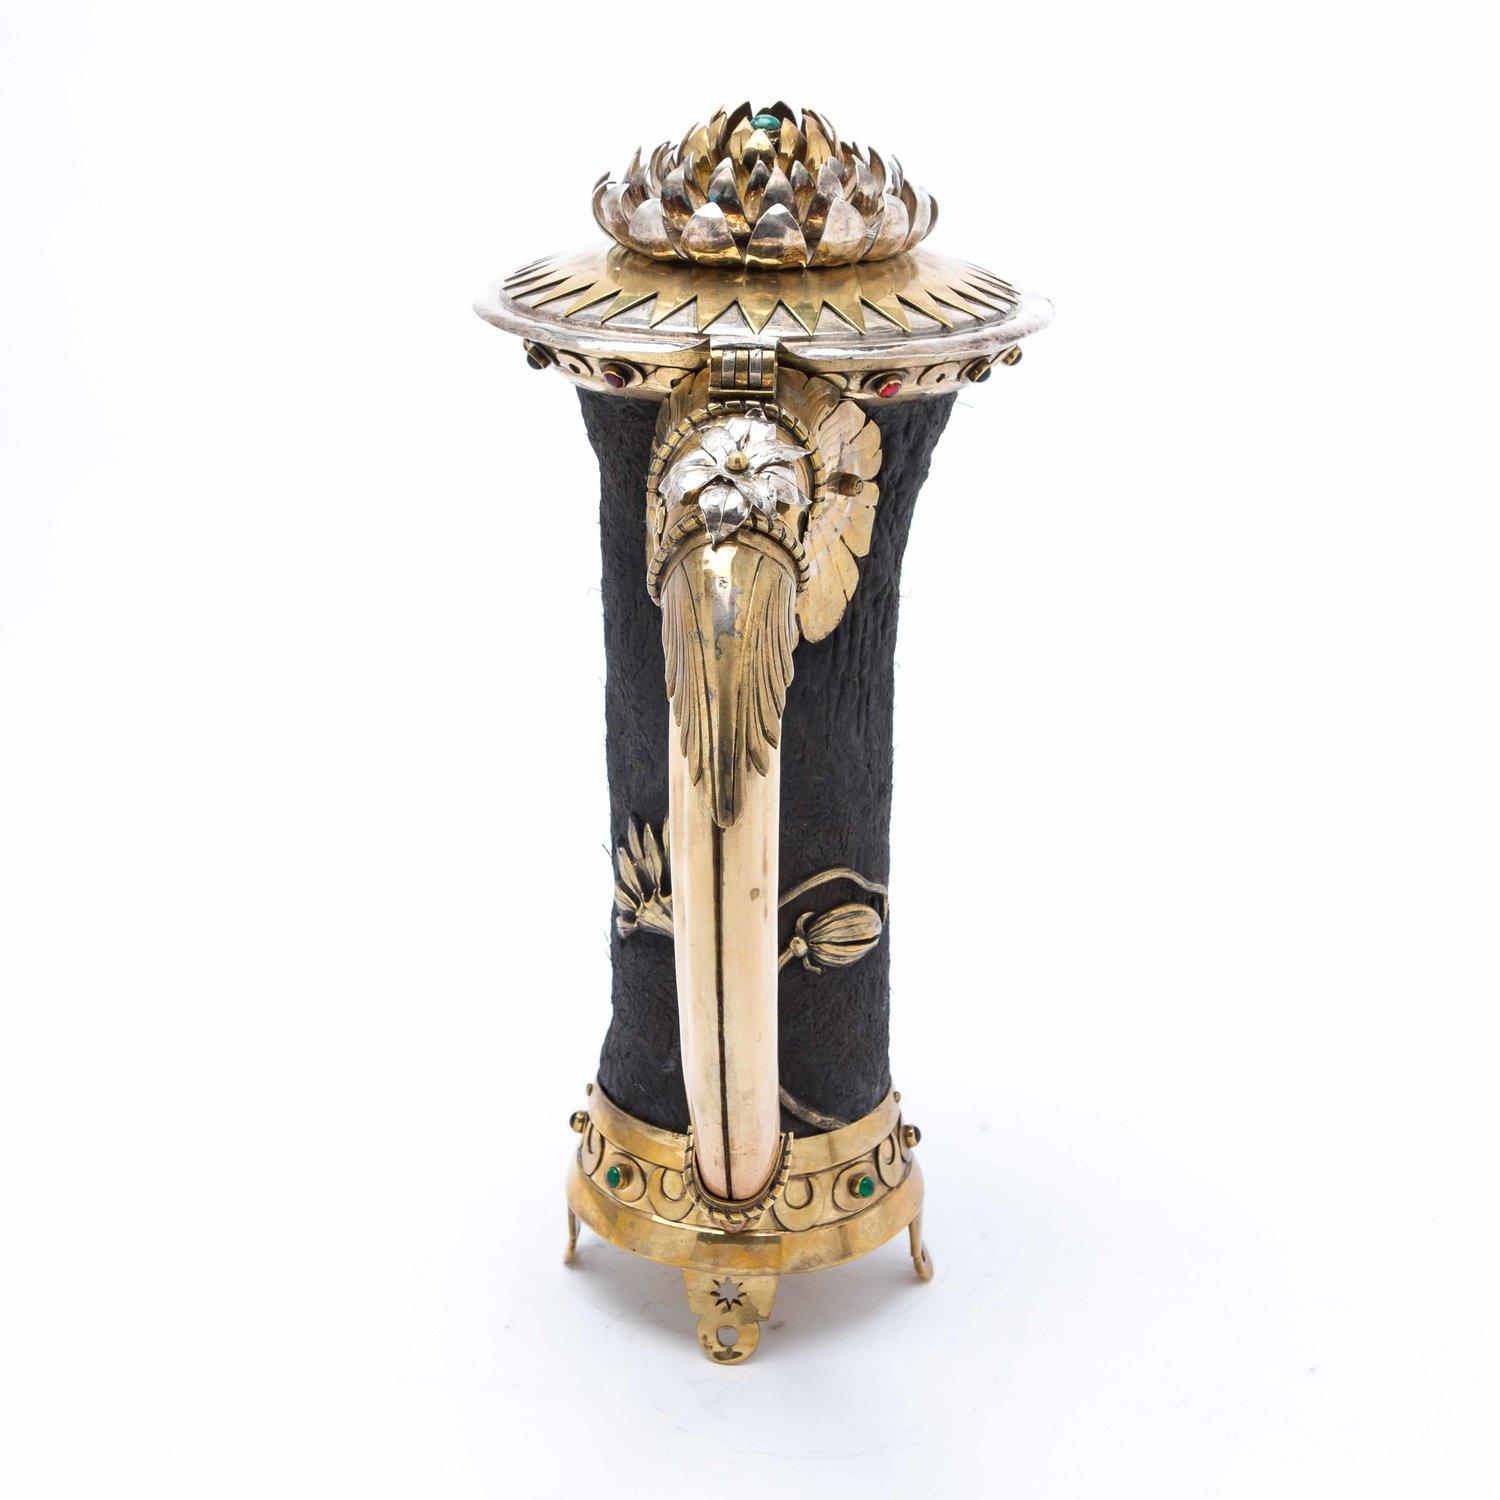 One of the most unusual items we’ve ever come across, an early 20th century water jug or vessel fashioned from hippopotamus leather, a hippopotamus tusk handle, the metalwork depicting flora with a mix of silver plate, copper and brass, decorated